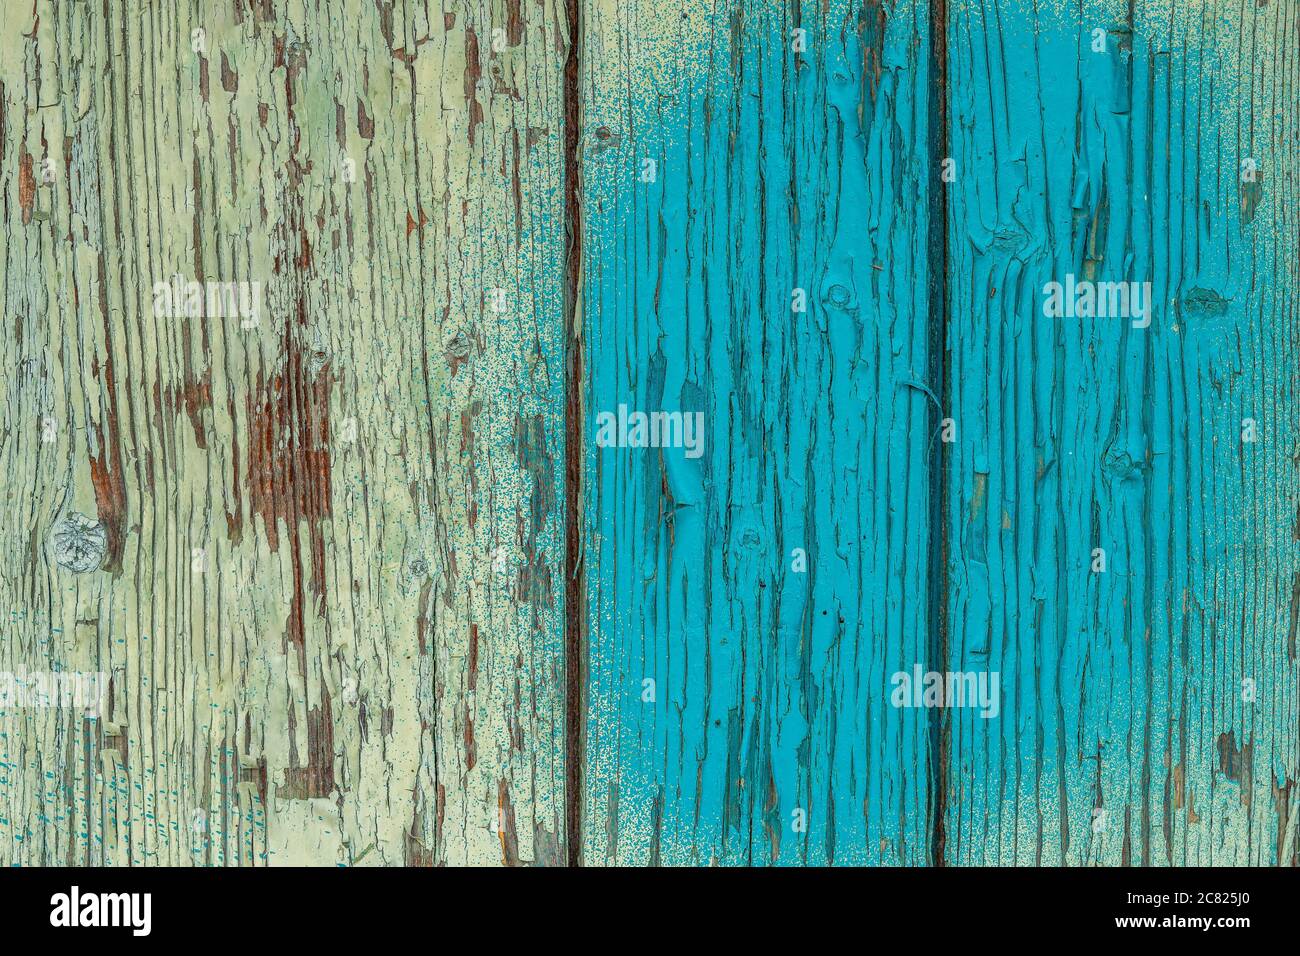 Weathered blue wooden background texture. Shabby wood painted teal or turquoise green. Vintage wood backdrop. Stock Photo